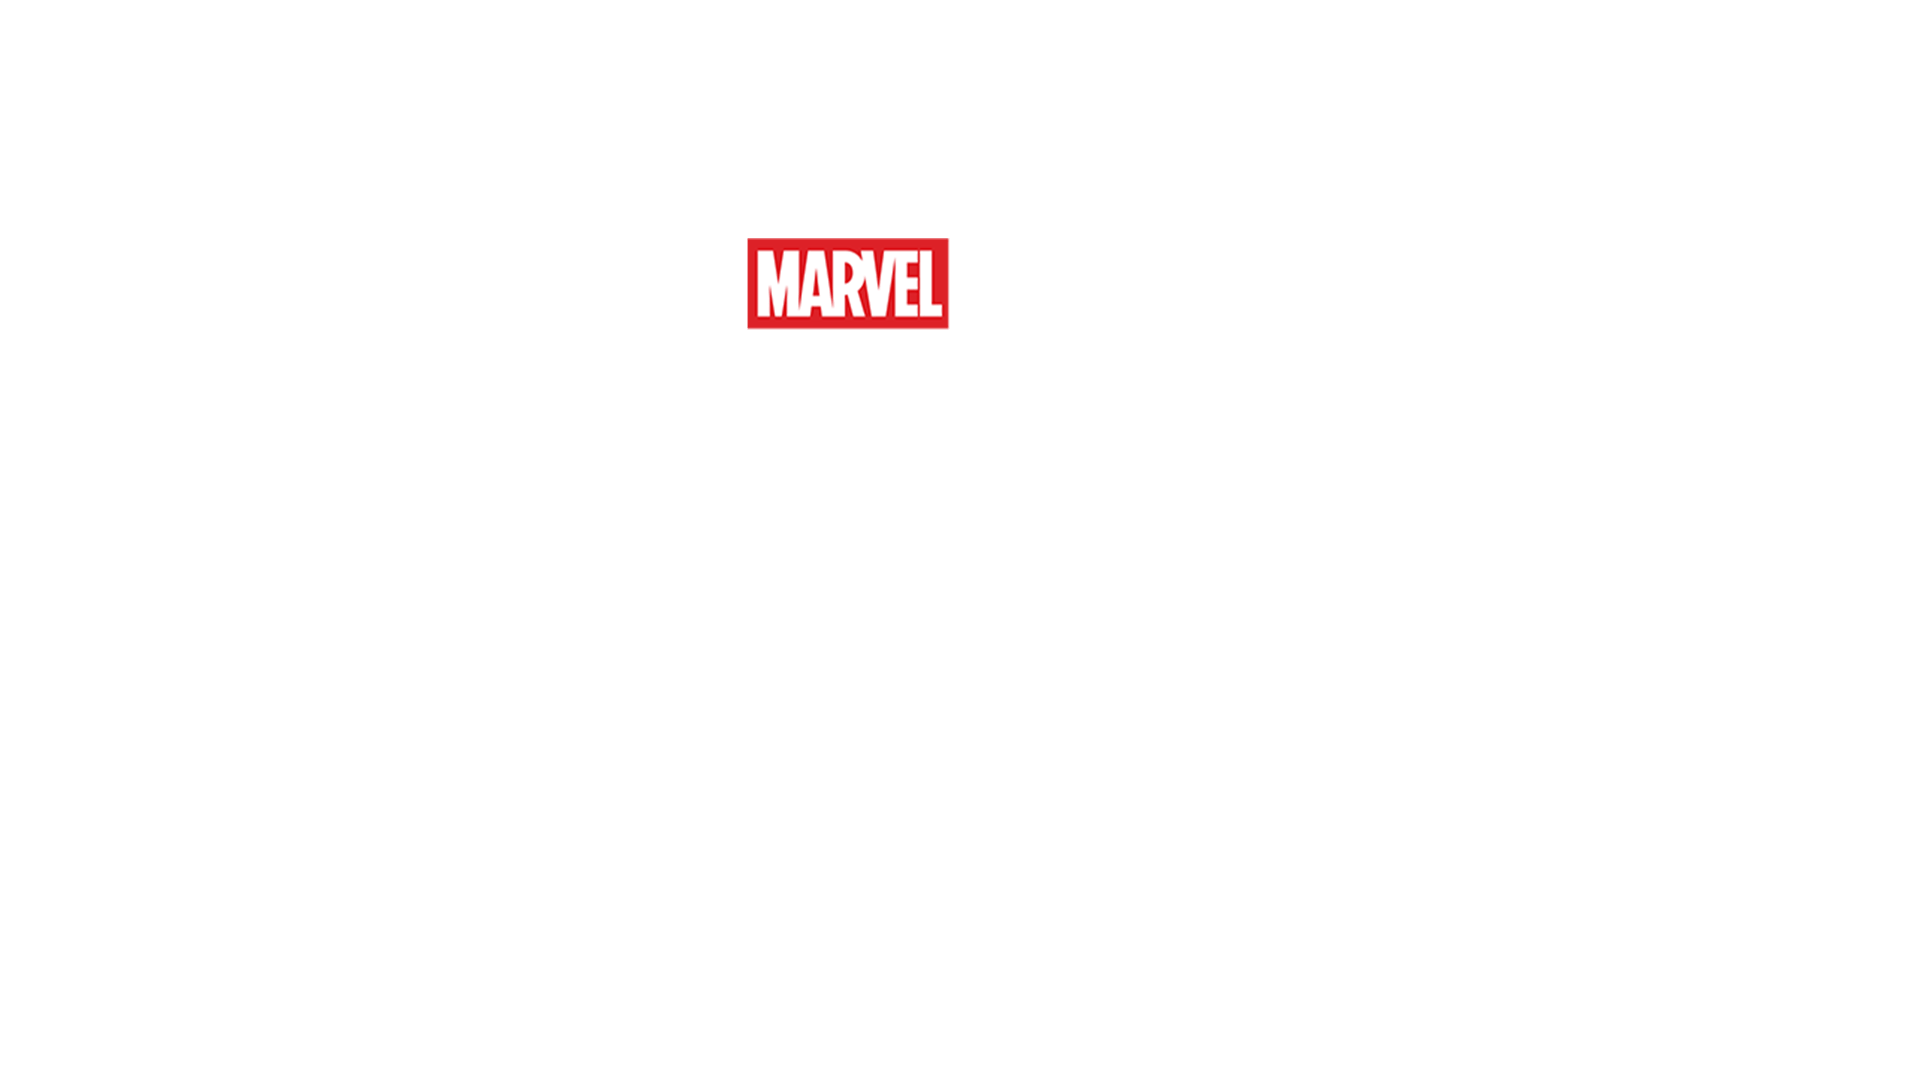 guardians of the galaxy free full move